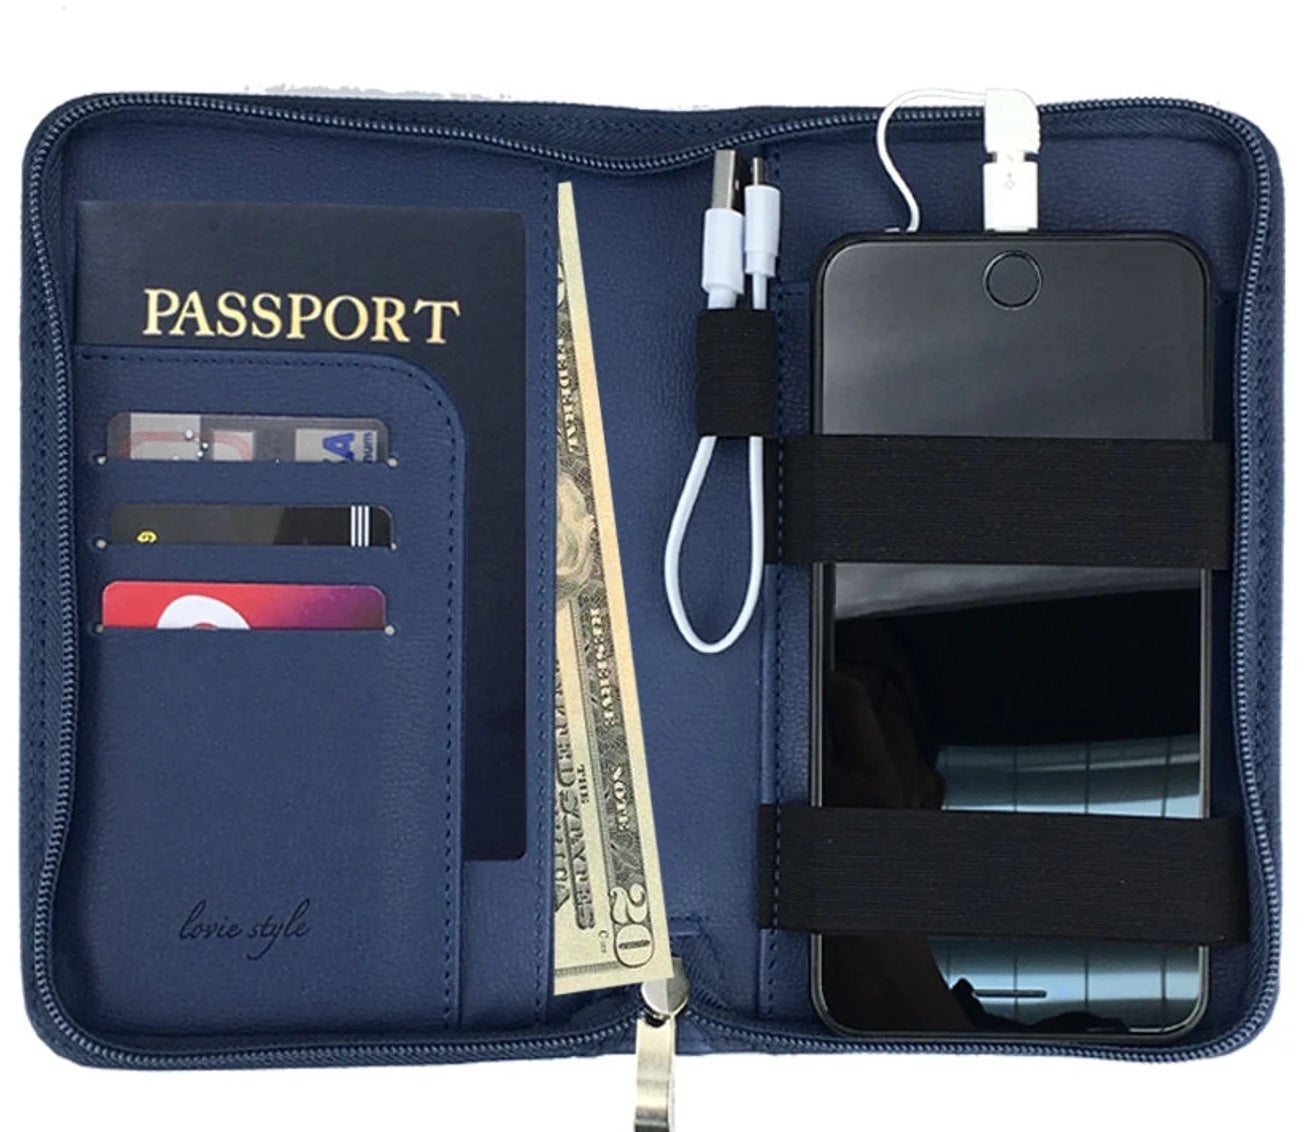 the inside of the blue passport holder, which is holding a charging phone, phone cable, cash, a passport, and credit cards